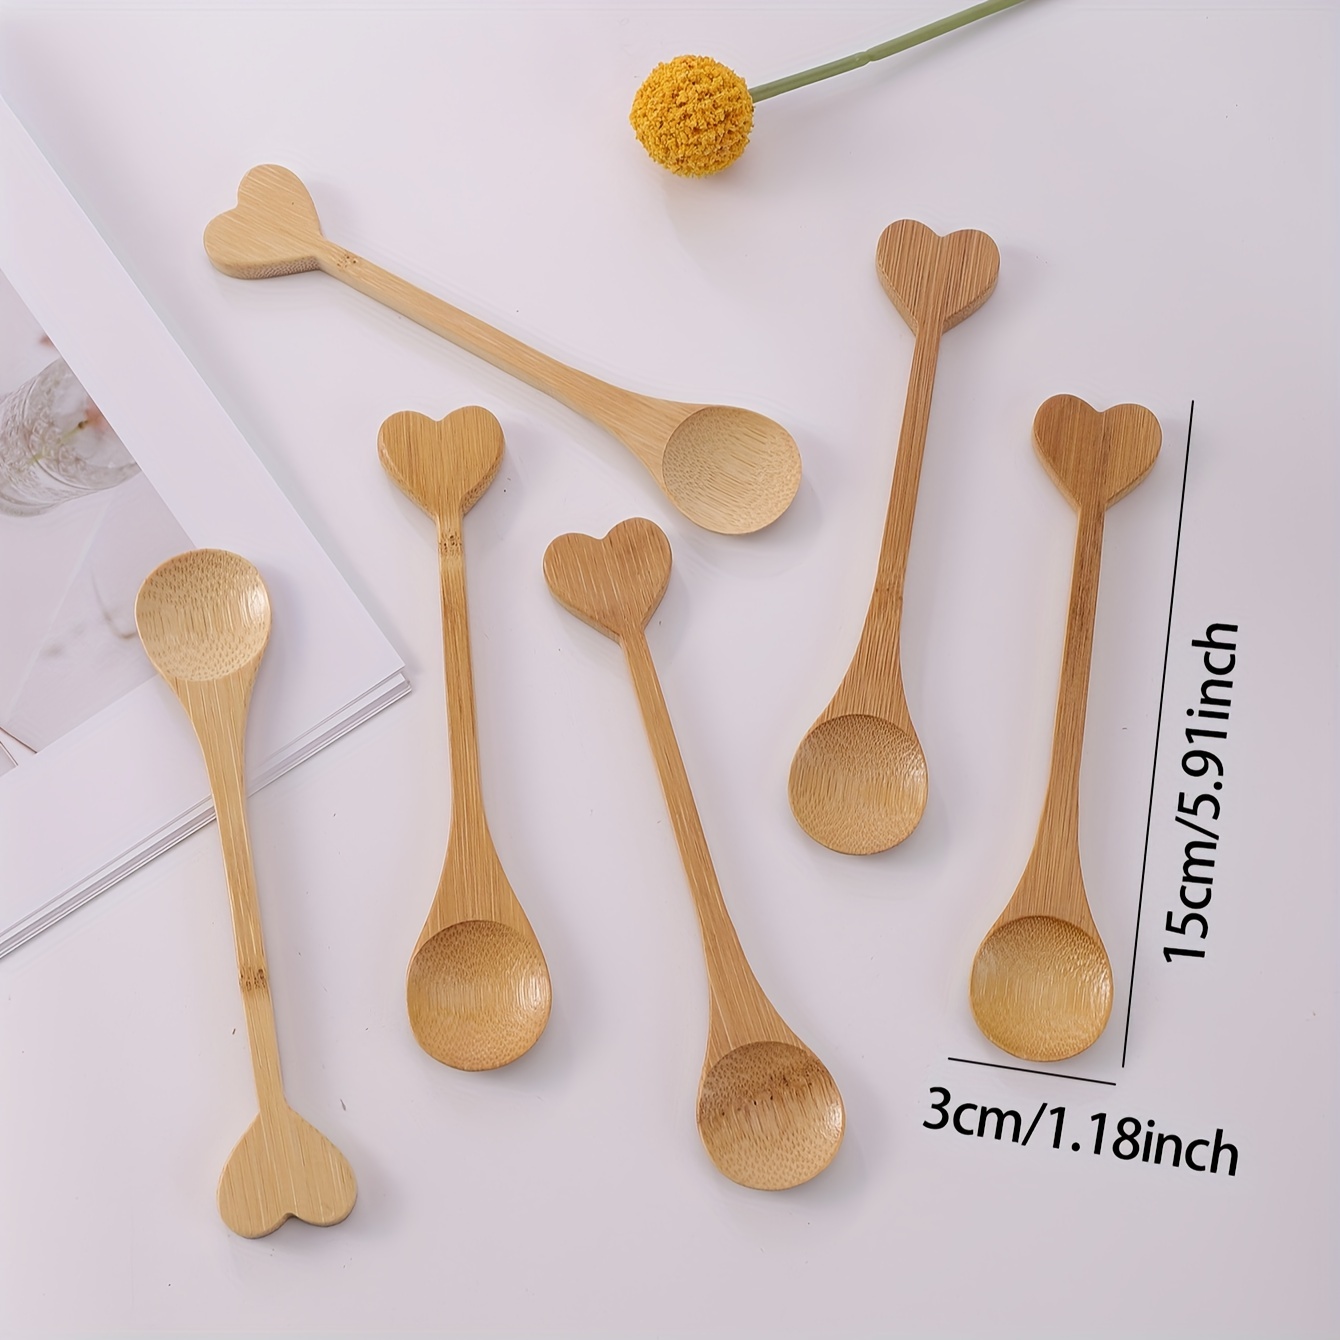 Wooden Measuring Spoon Set - Coffee, Tea, Sugar and Spice Scoops